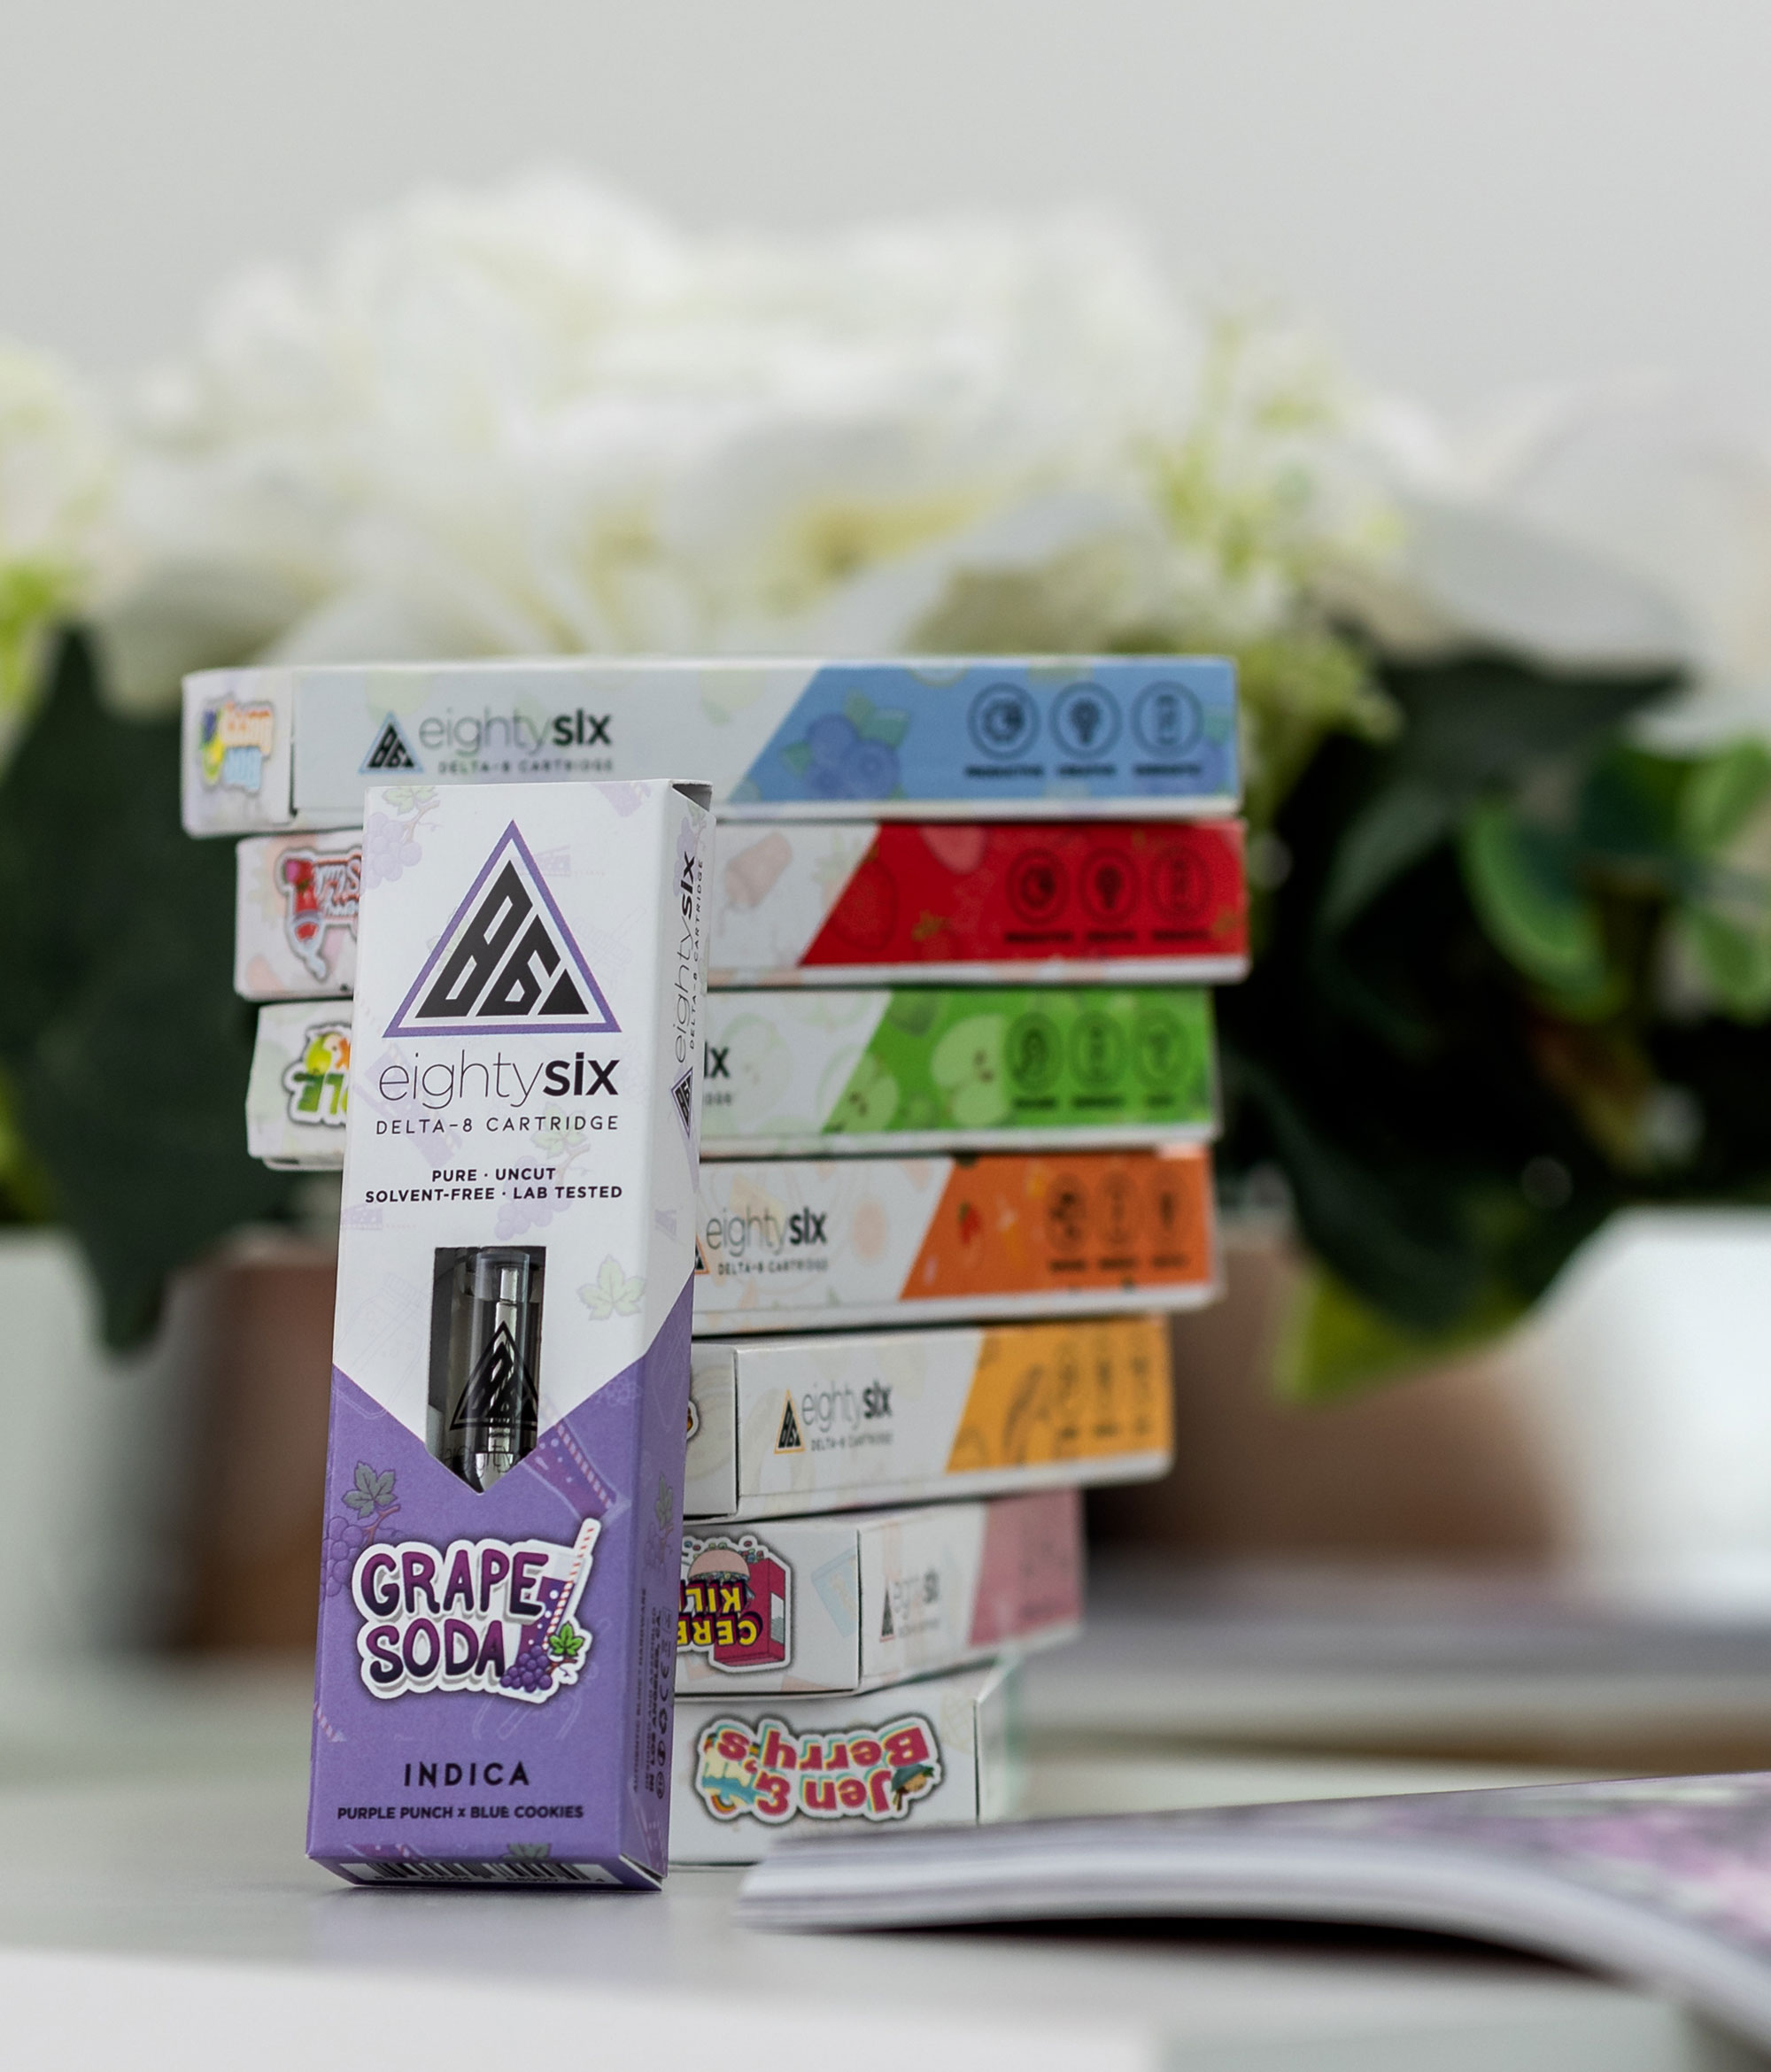 Grape Soda Delta-8 THC Vape Cartridge leaning on the rest of the product collection series.